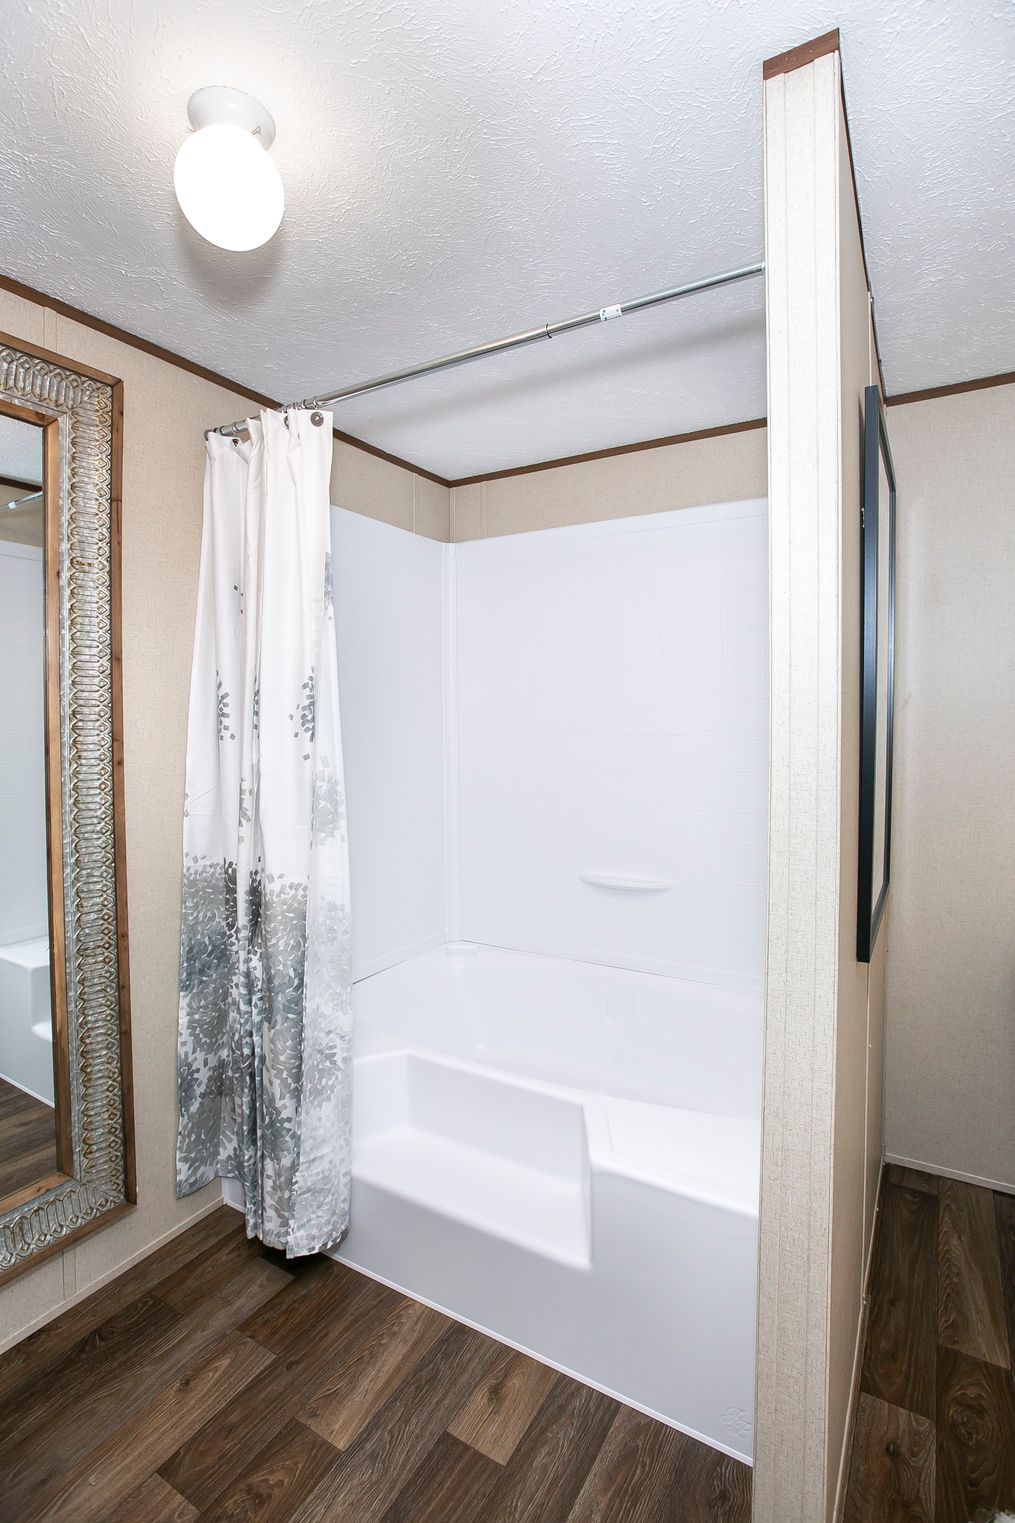 The TRIUMPH Primary Bathroom. This Manufactured Mobile Home features 5 bedrooms and 3 baths.